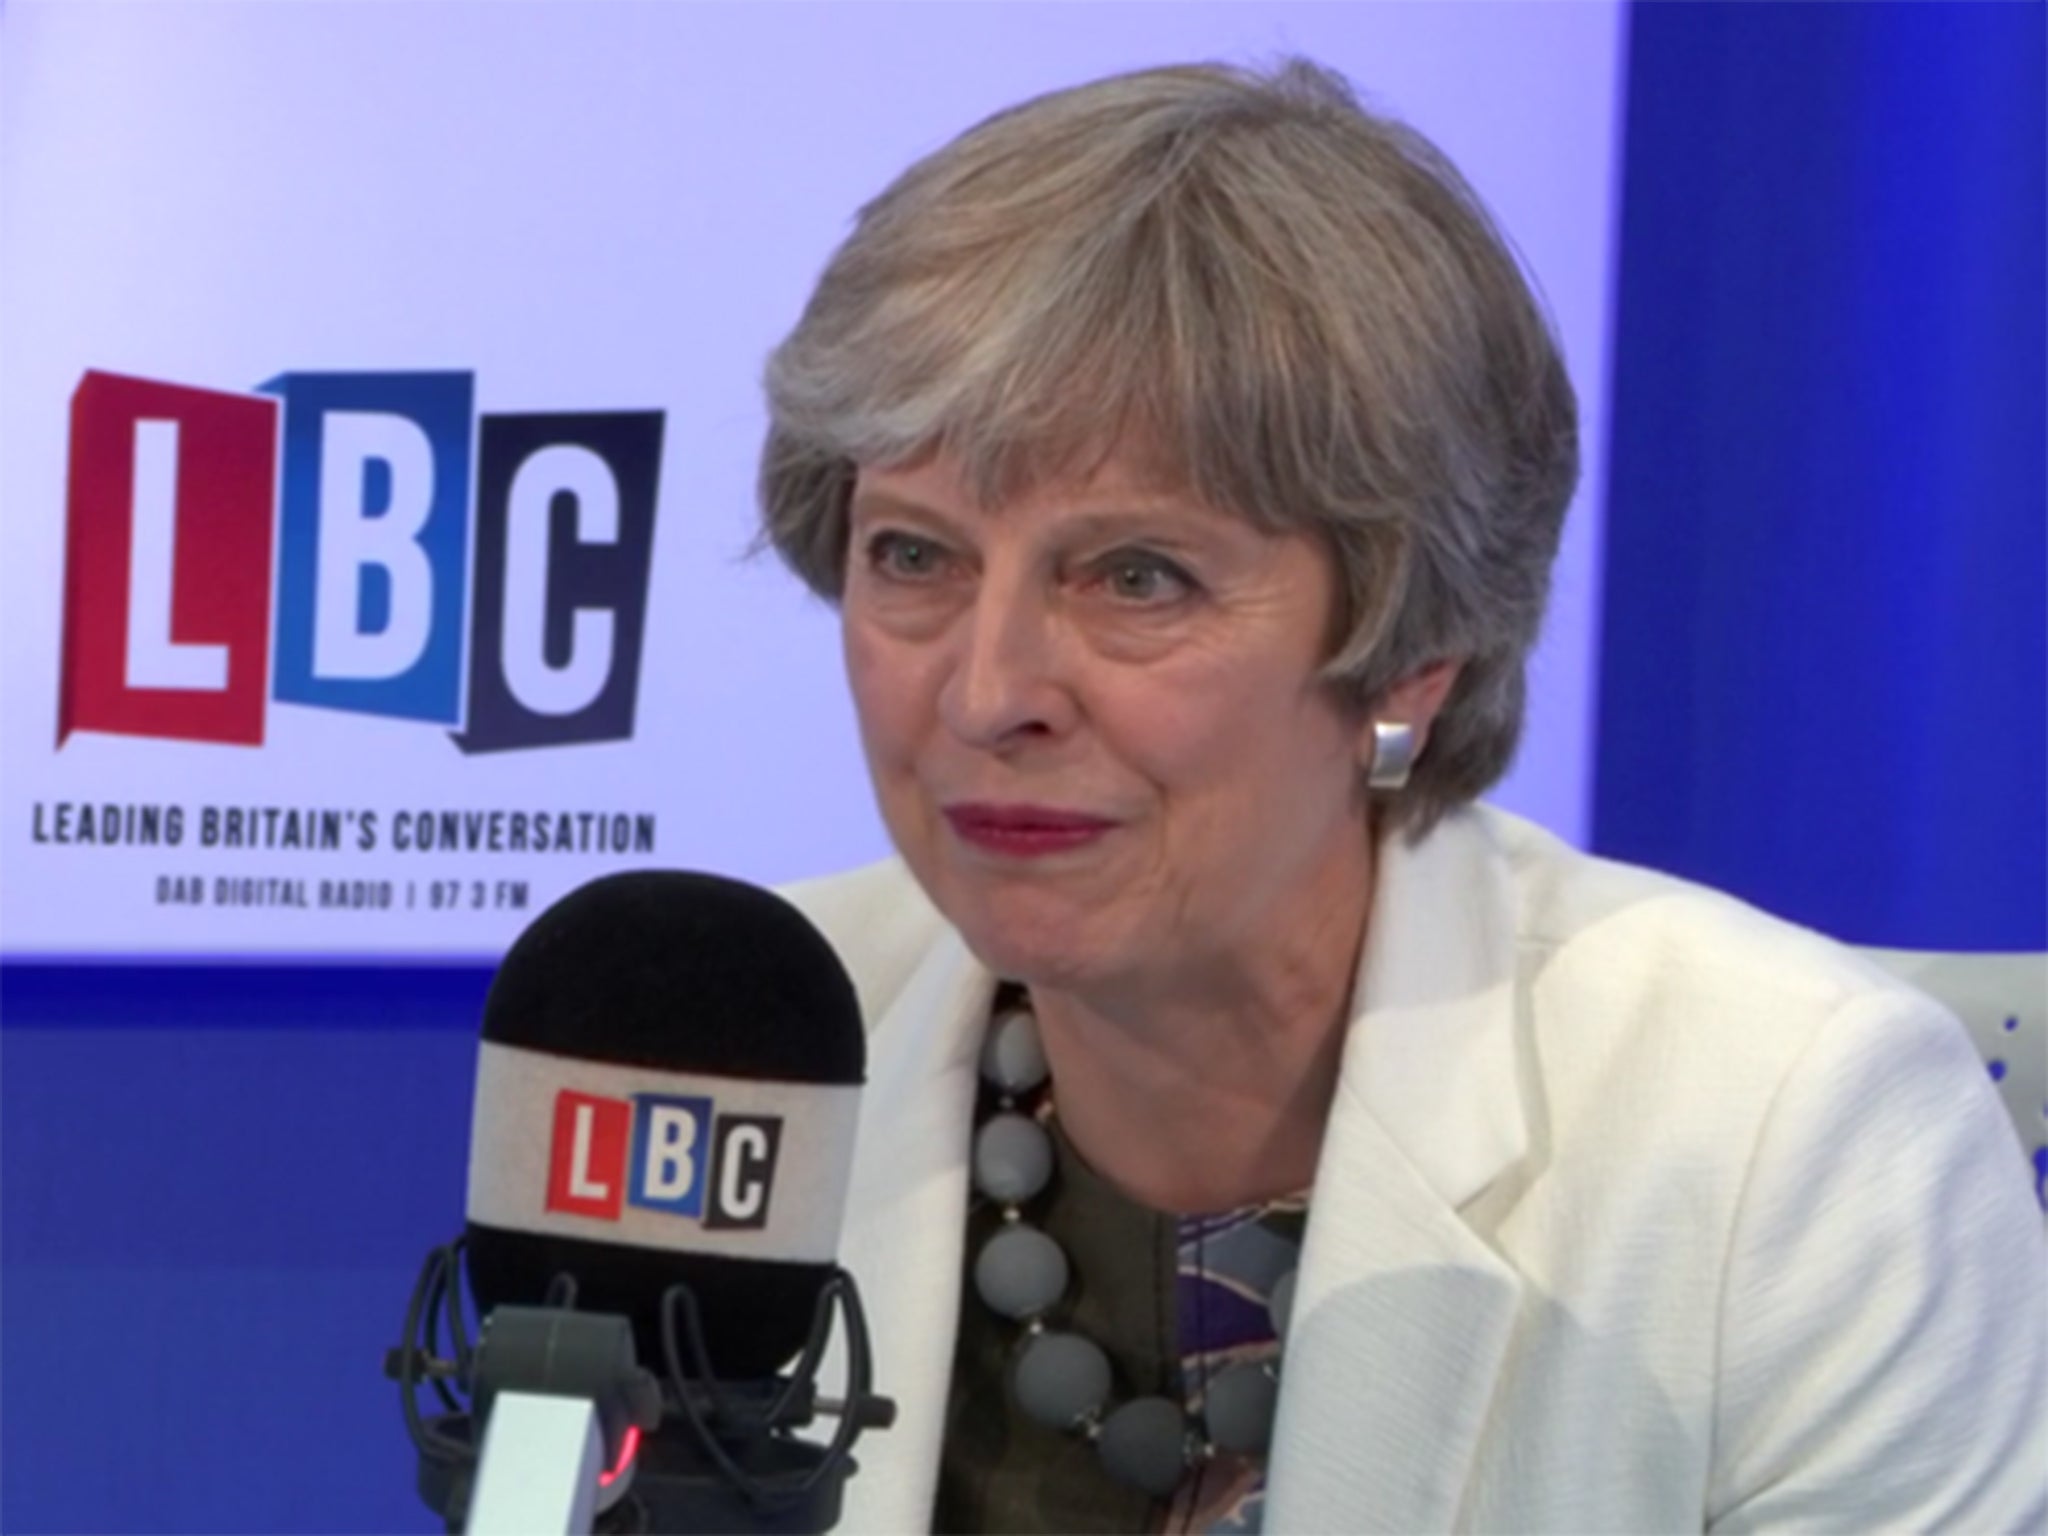 After her LBC appearance inevitably produced headlines about May being unsure on Brexit